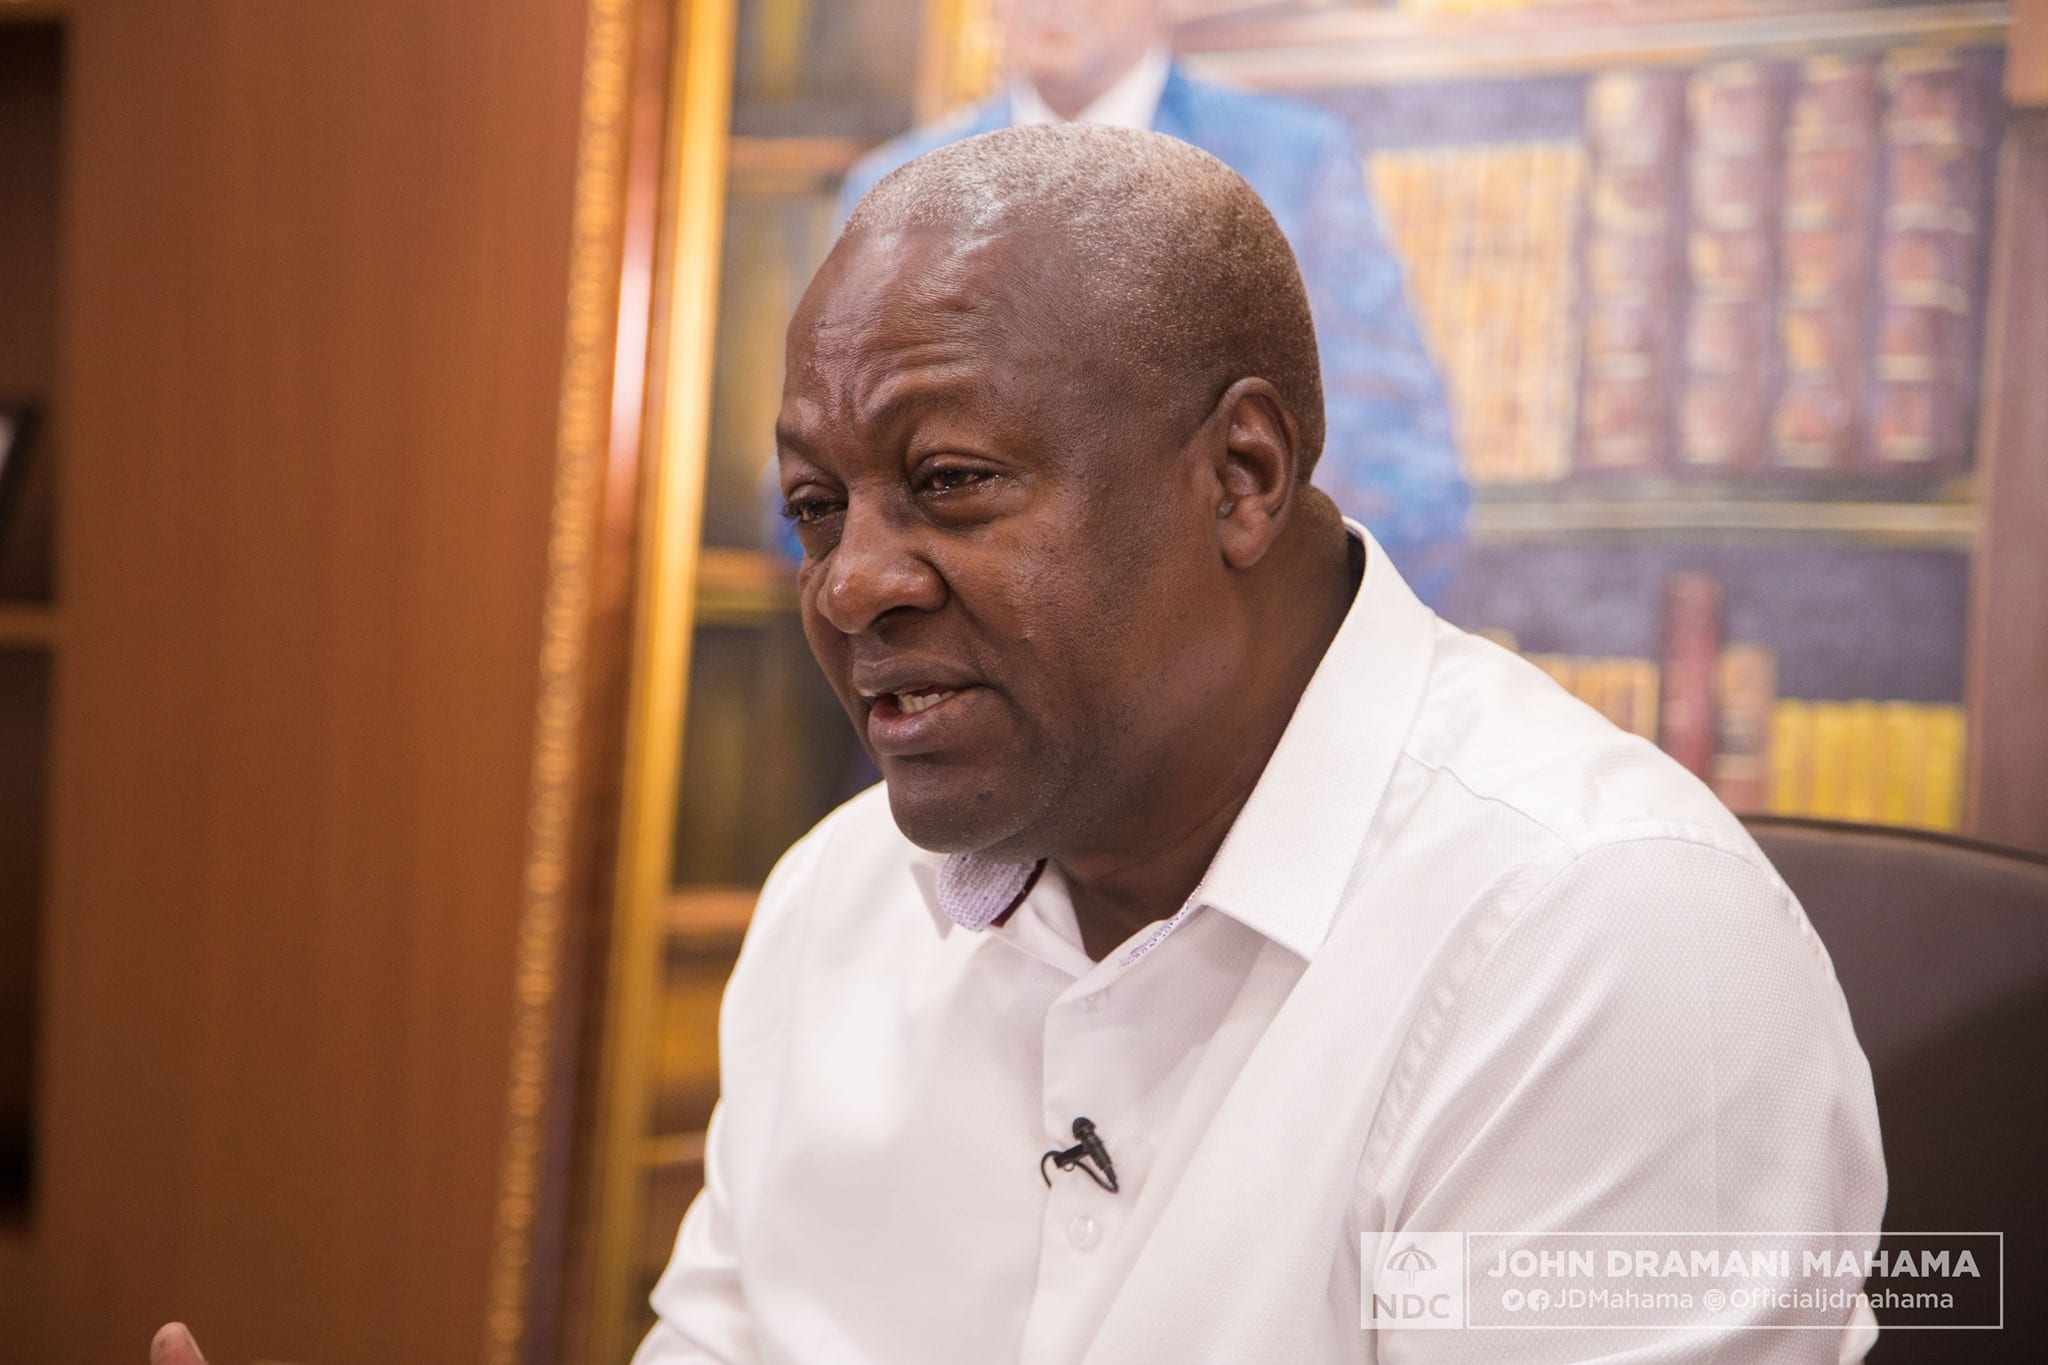 Mahama exposed by NPP over inflated cocoa road projects 49